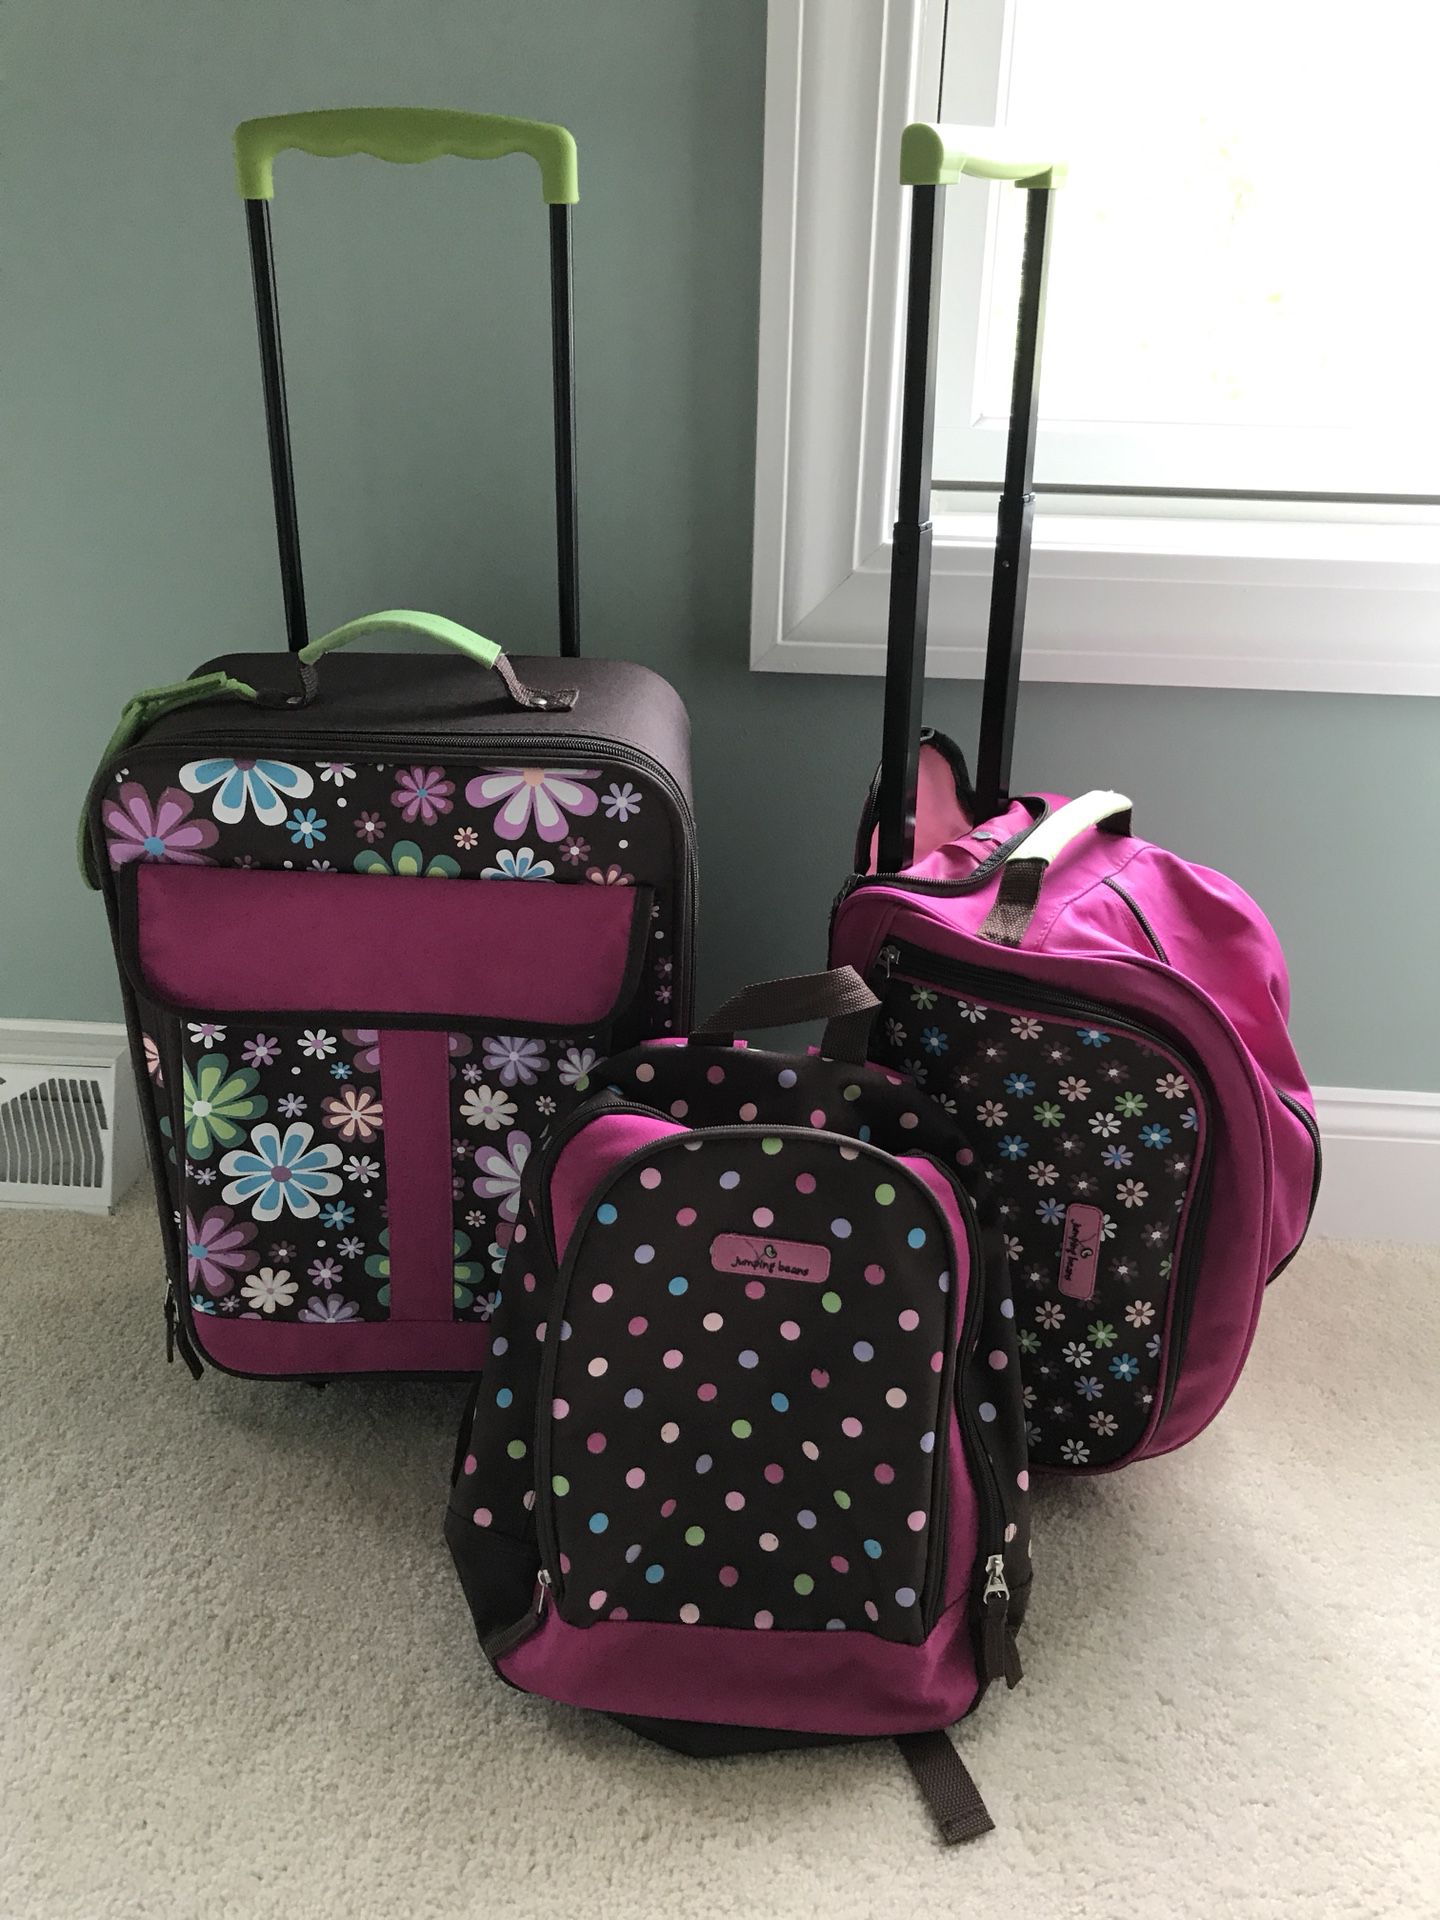 Kids Luggage Set for Sale in Bronx, NY - OfferUp